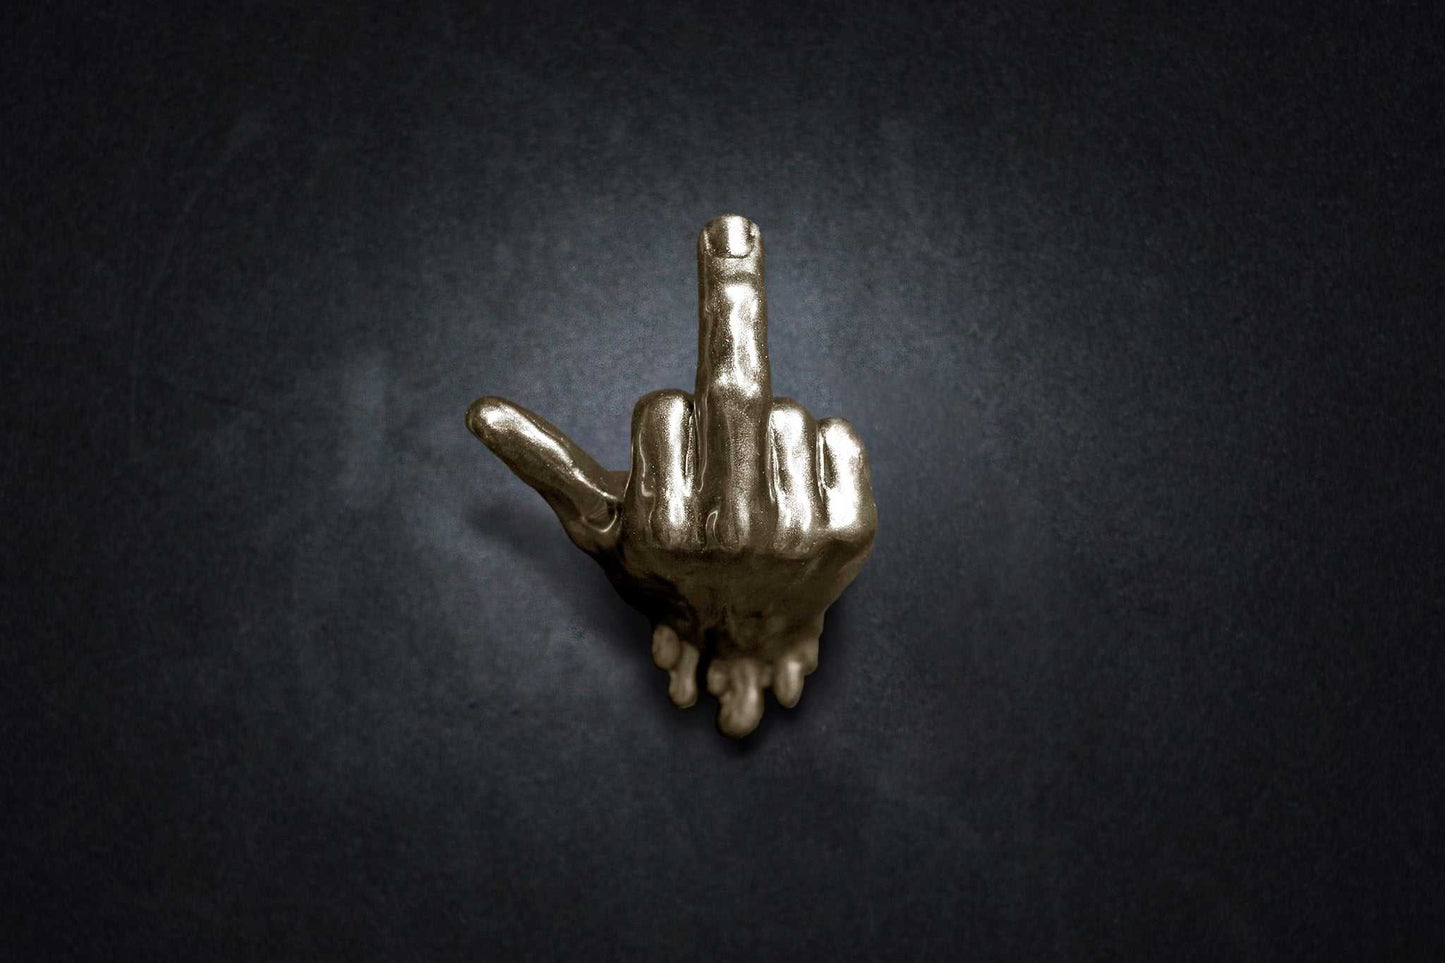 Mid-FingerMate
Check out our latest creation inspired by American street culture, the middle finger Key Holder!

This versatile piece of street sculpture art is not only a playfulHOZZY Artistry StoreHOZZY Artistry Store